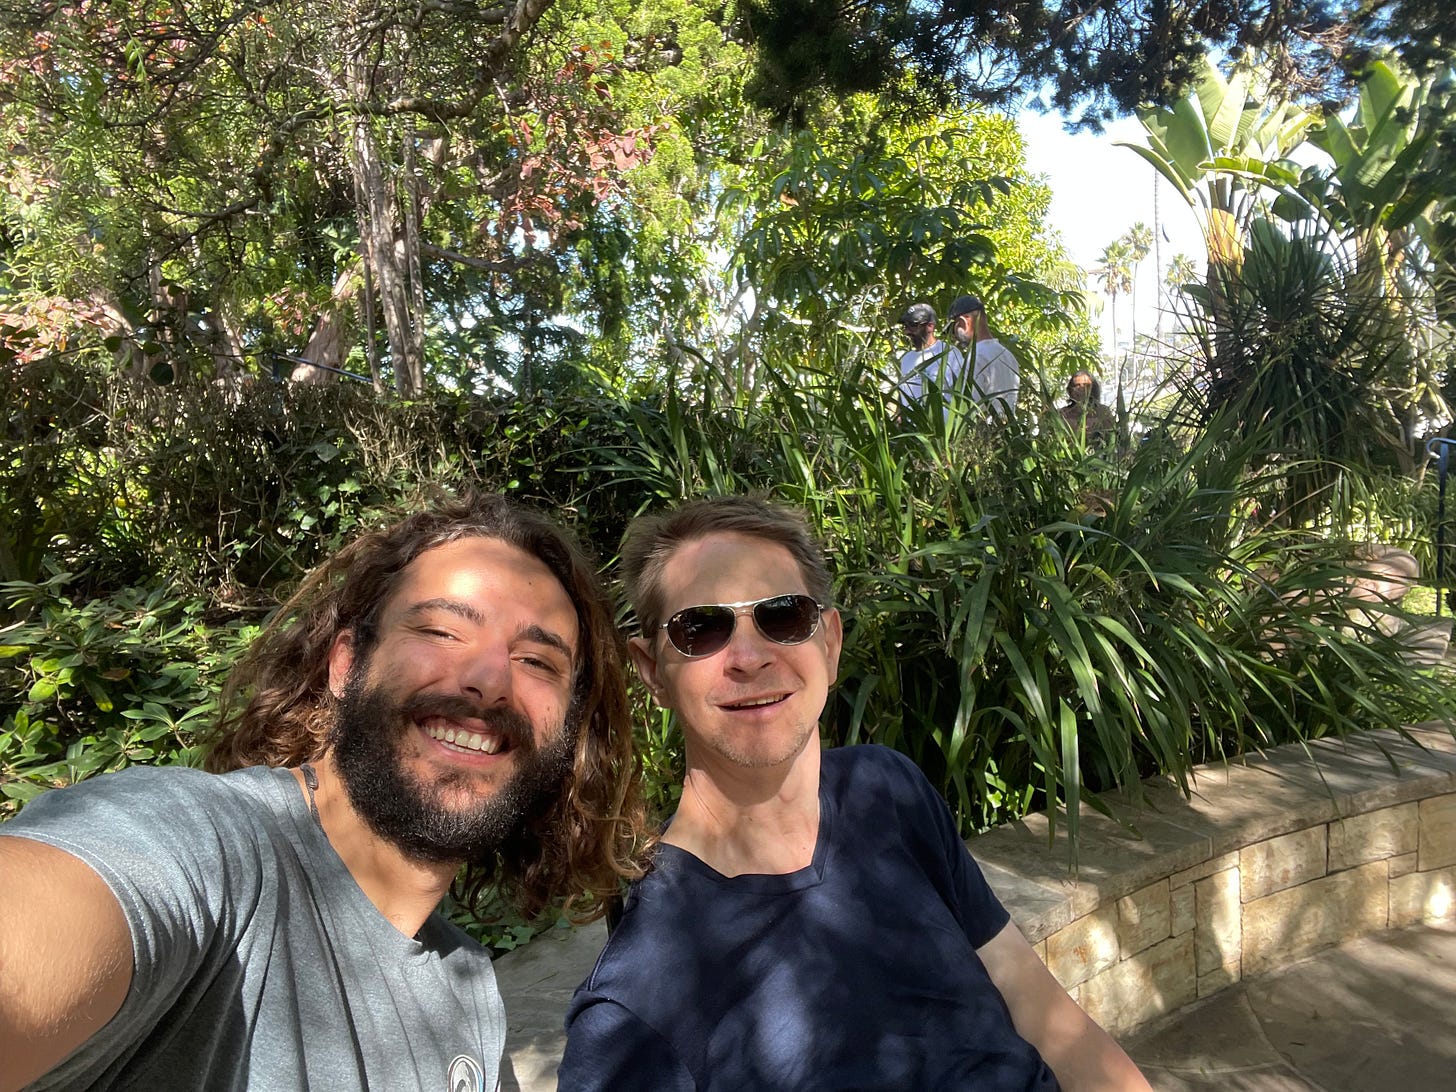 Kabir and Zach selfie with beautiful foliage of the meditation garden in the background. Speckled sunlight throughout.